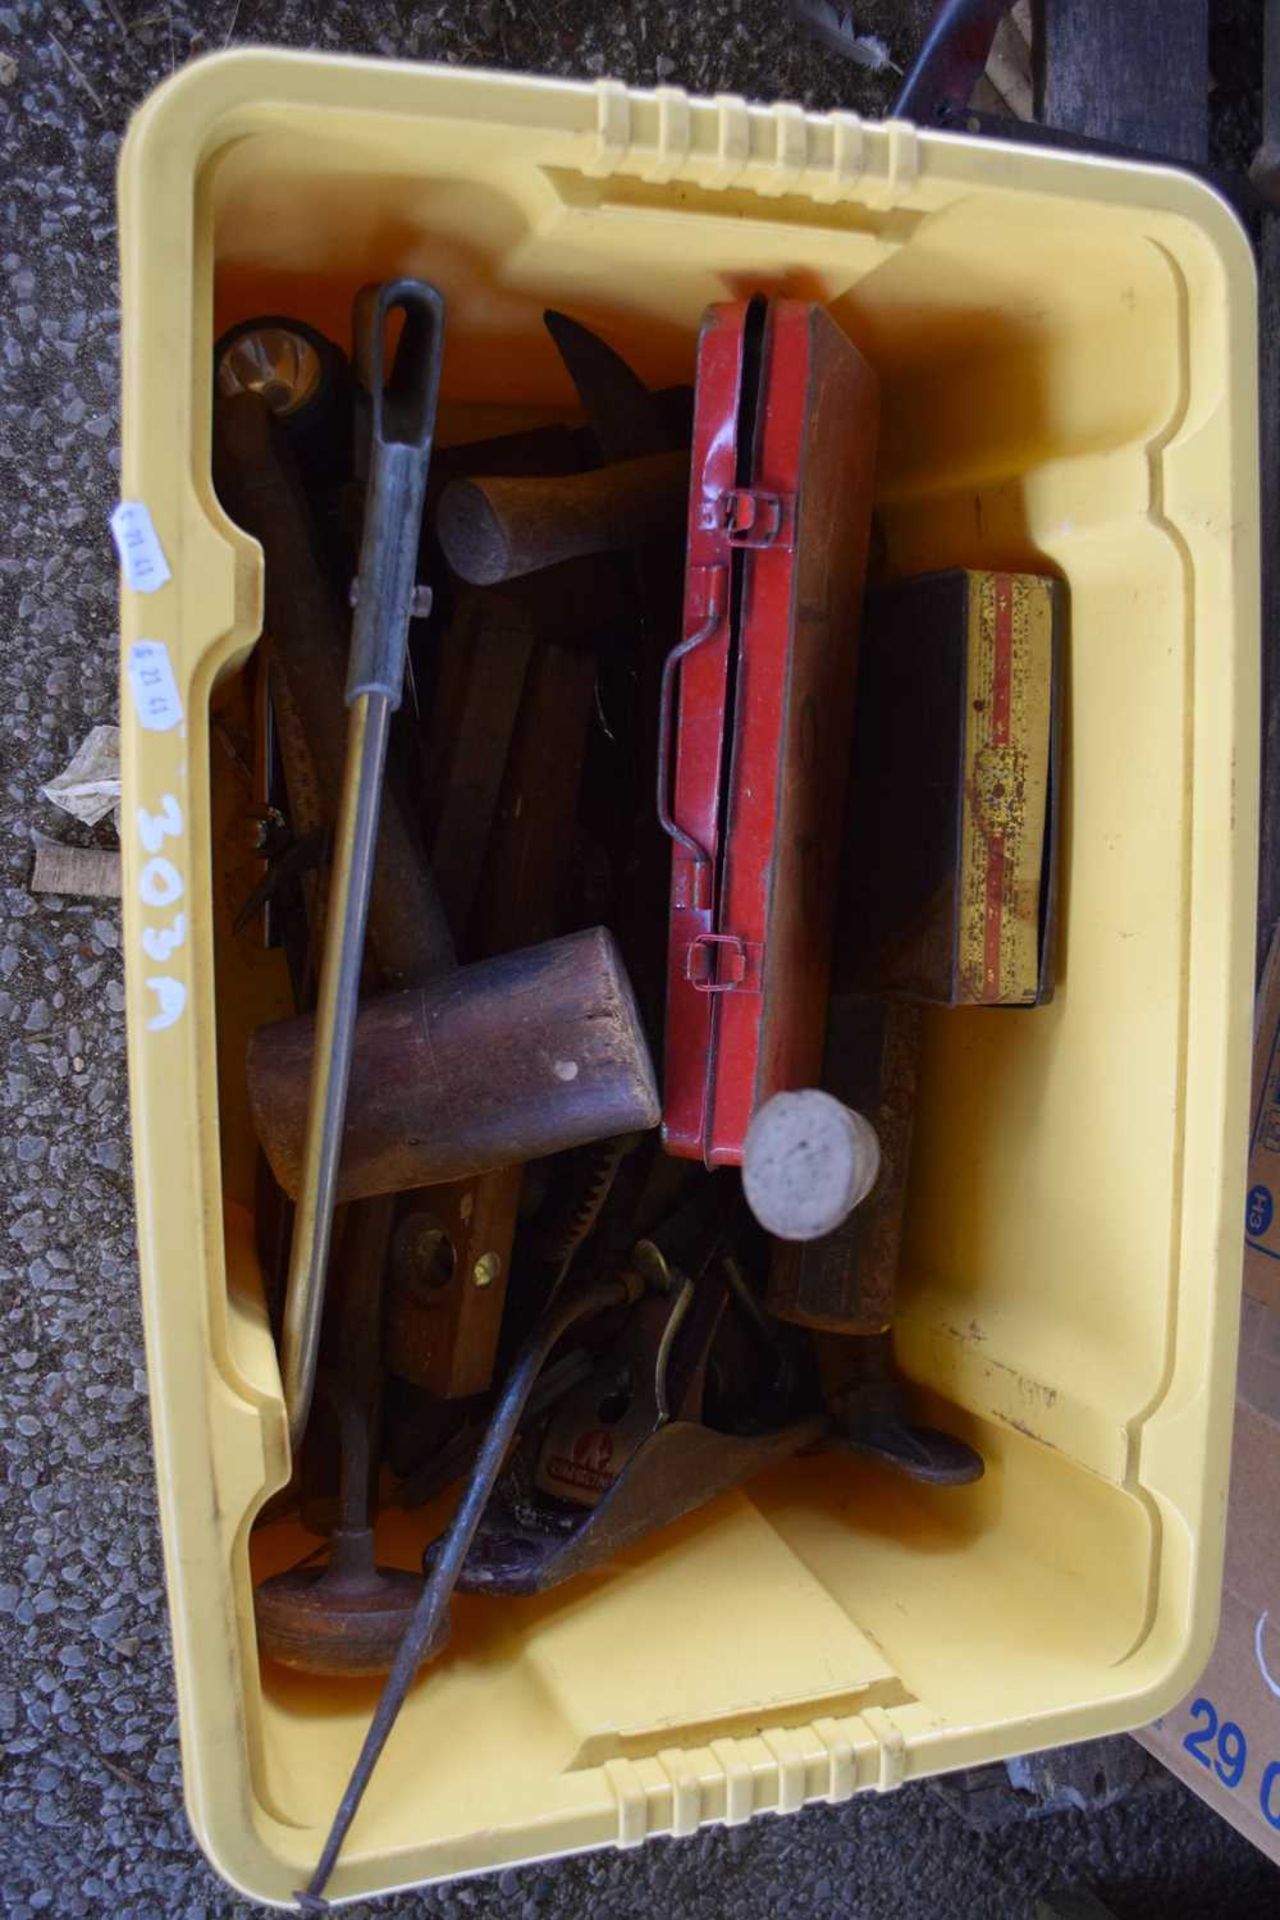 Box mixed clearance items hand tools, drill bits etc...